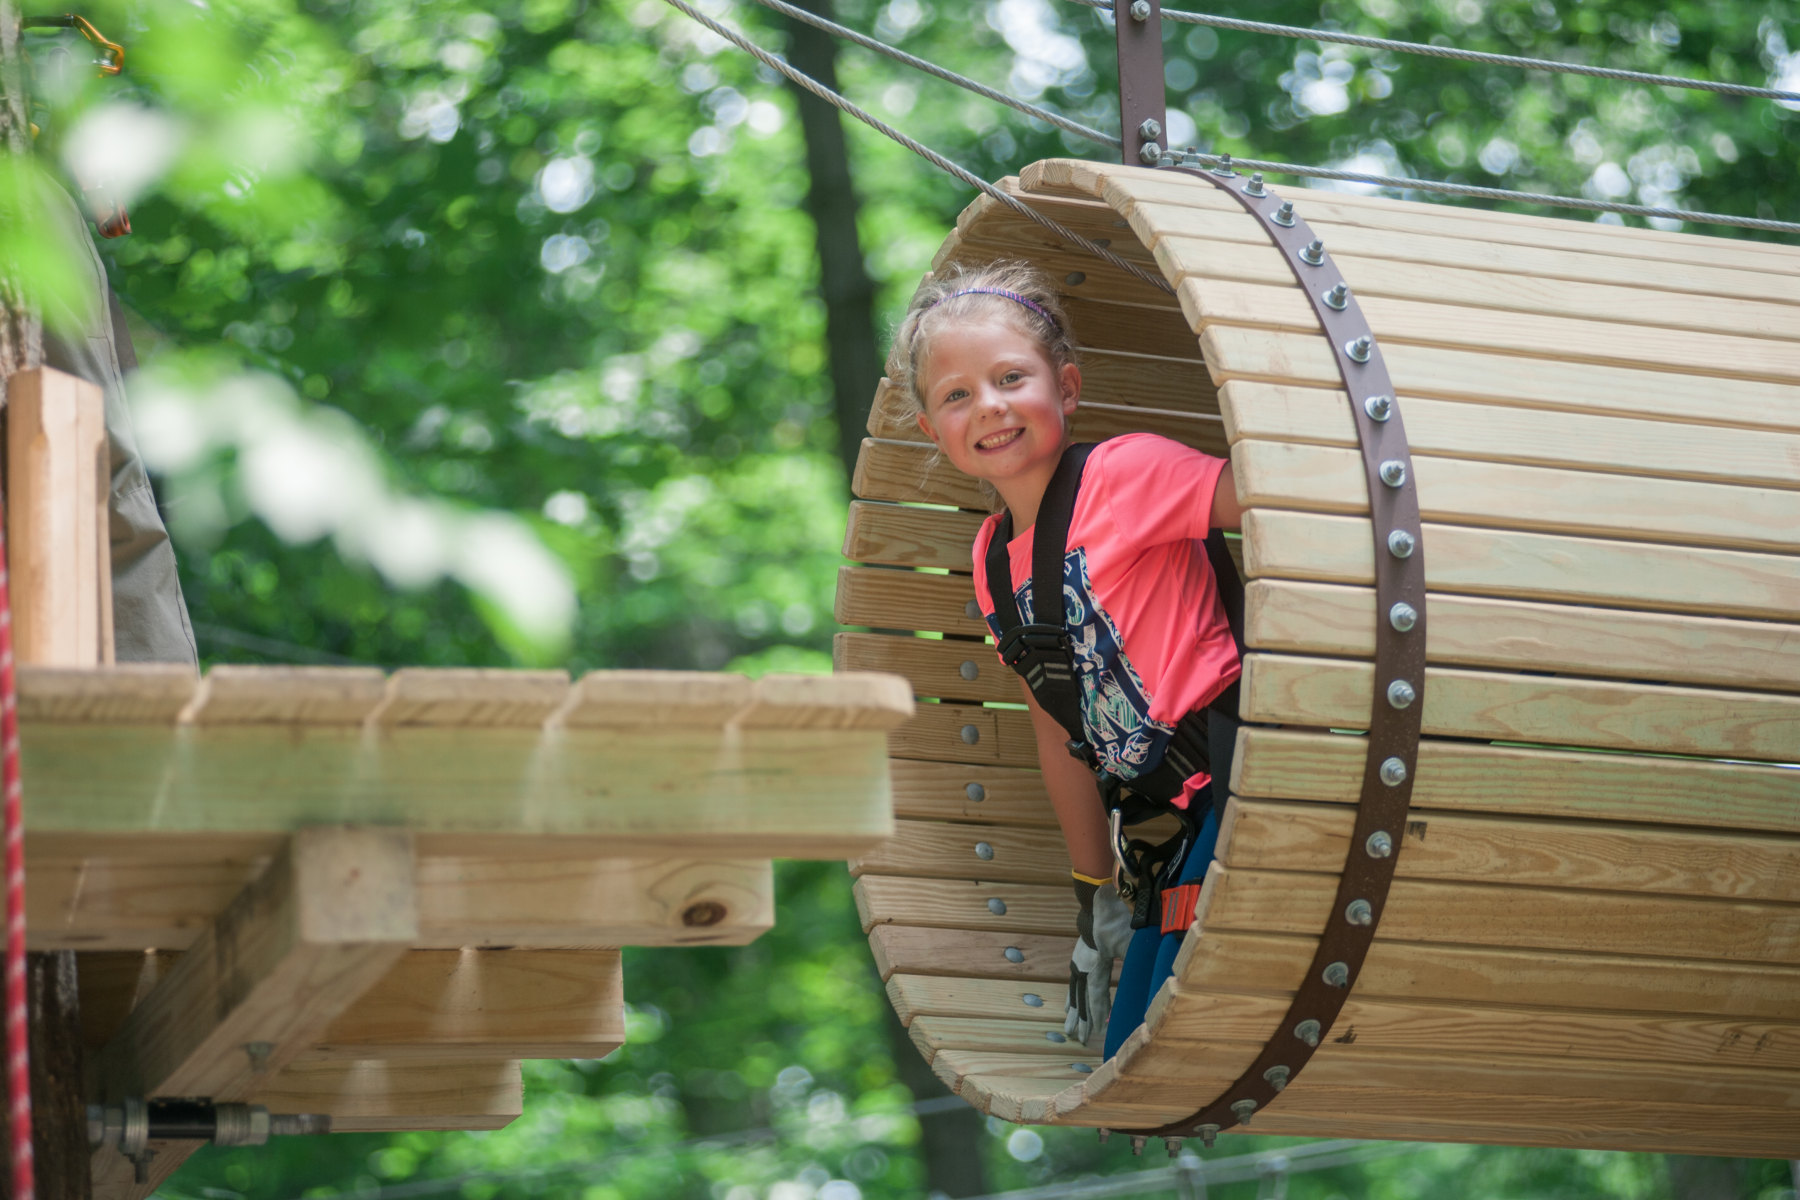 ZipZone Outdoor Adventures combines activities and thrills geared to the age of the children (above 7) or adults and kids 7 and older.